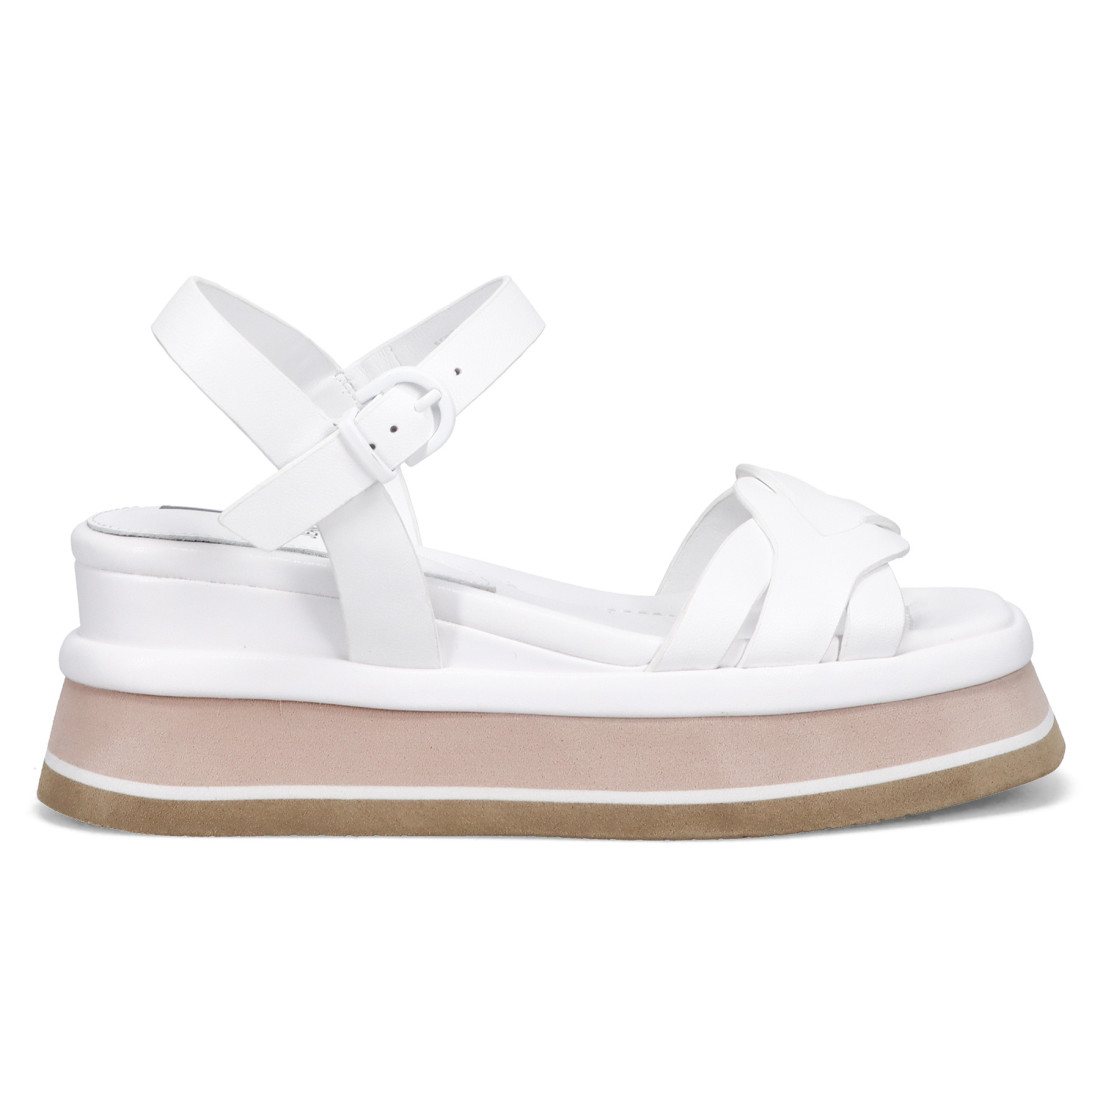 Jeannot white leather wedge sandal